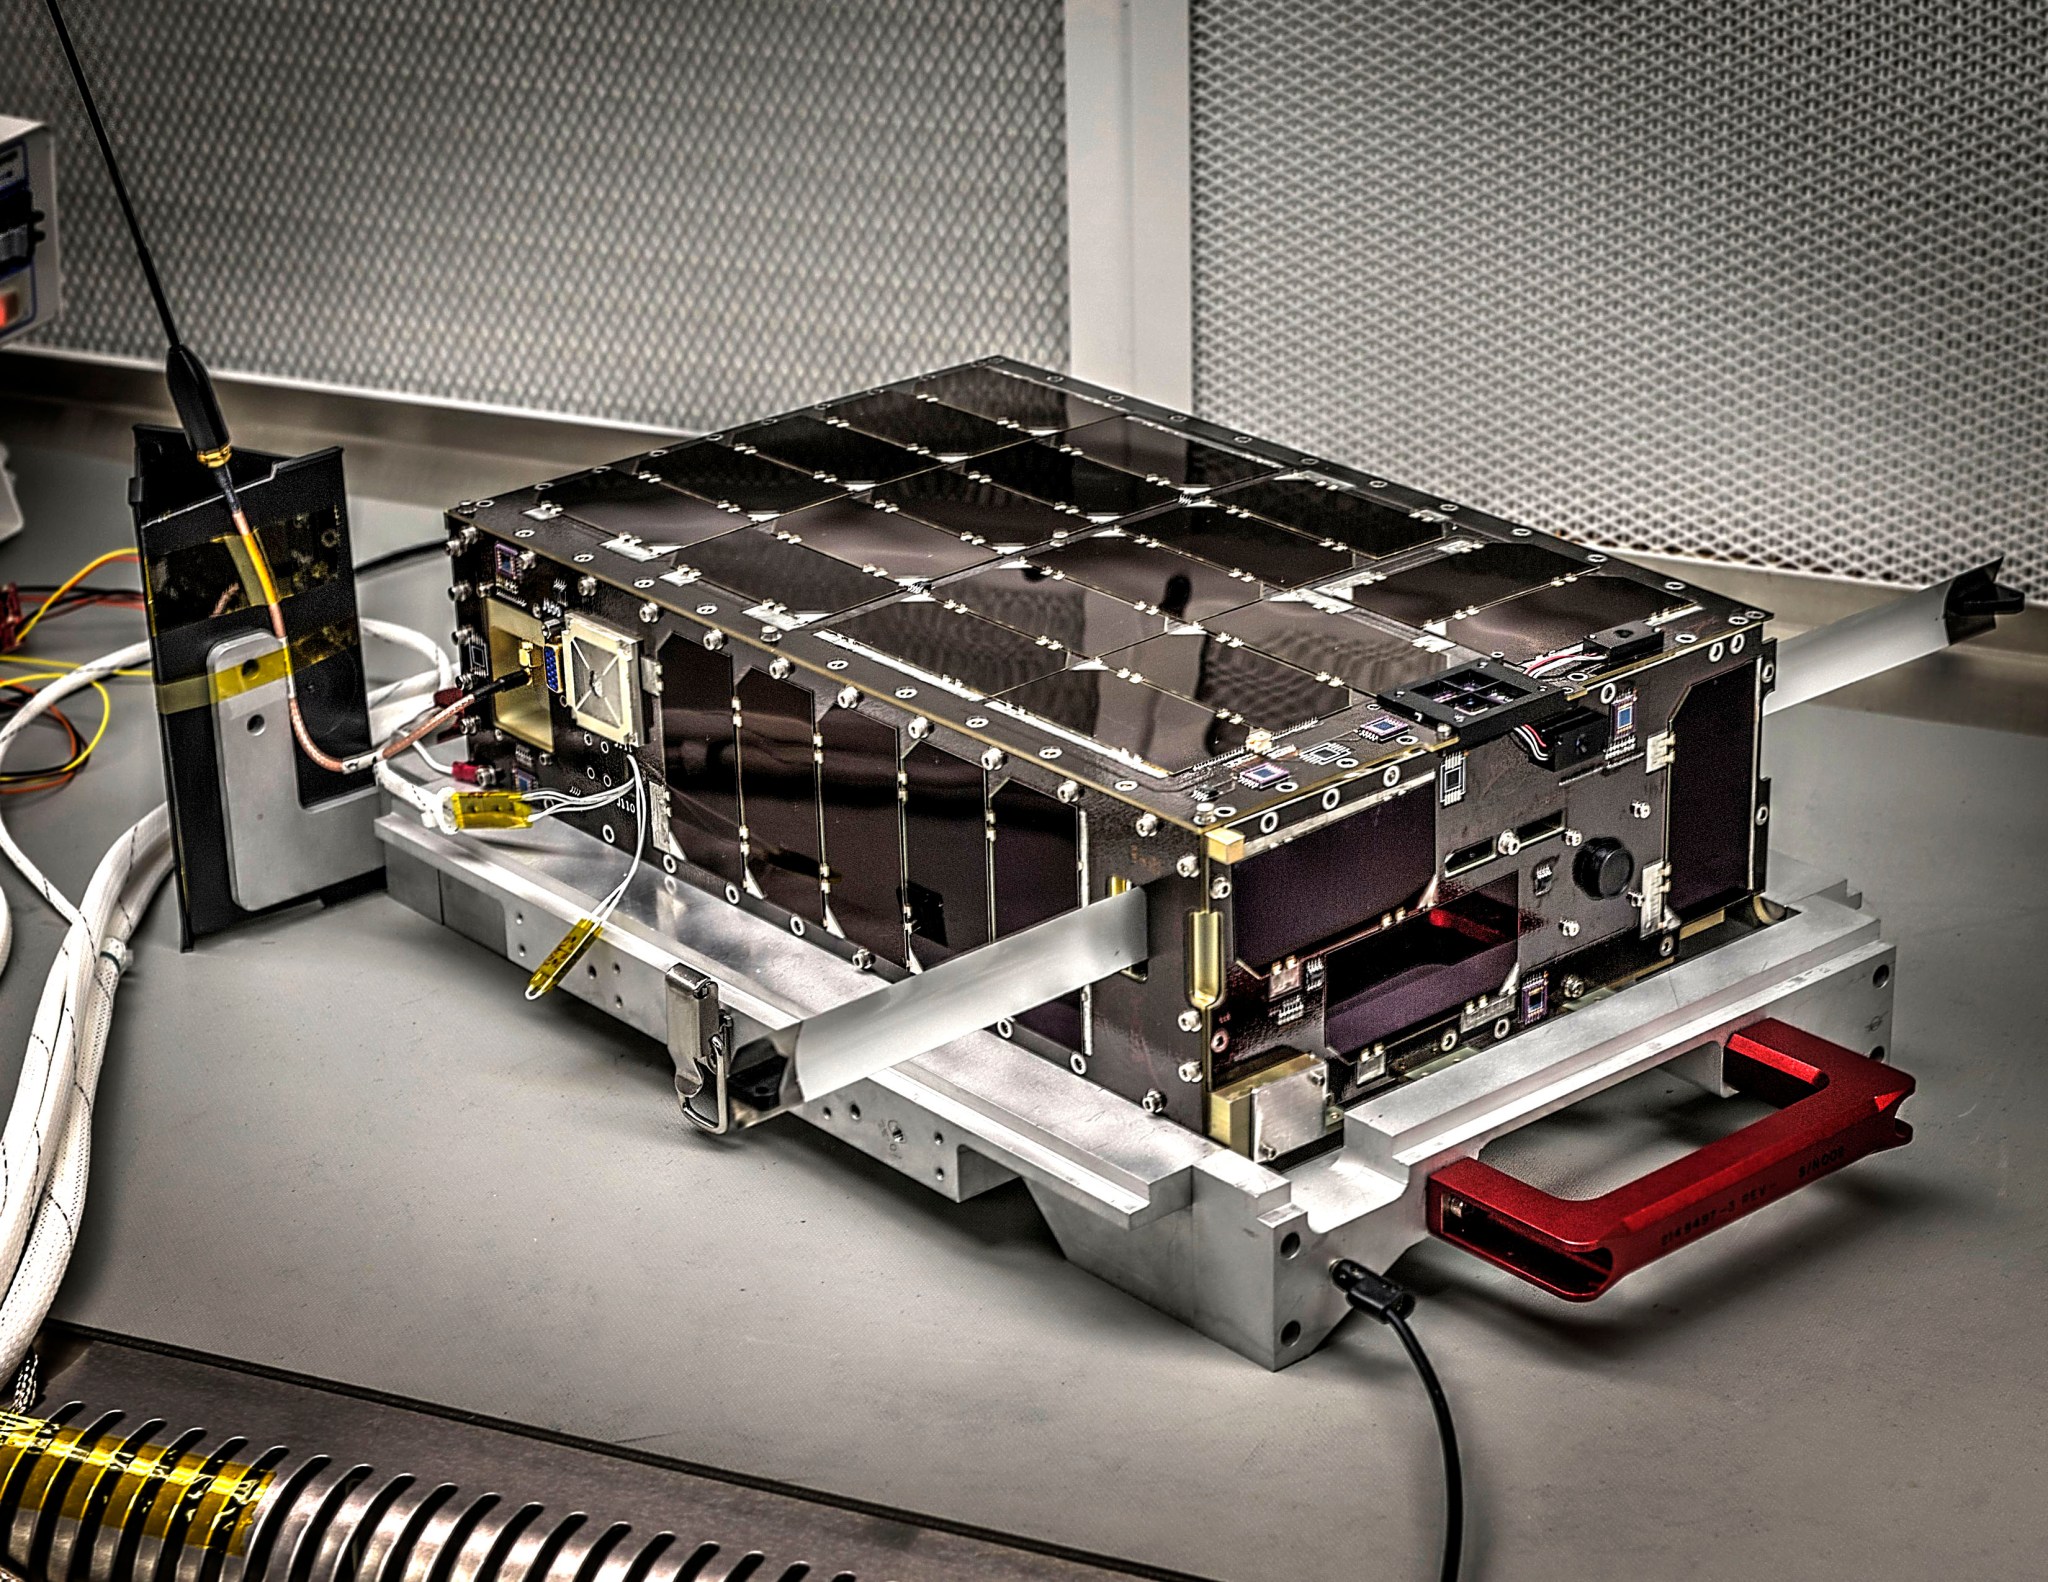 Prelaunch photo of Dellingr, a flat rectangular instrument with silver metal around its bottom. The top and sides are covered in small dark solar panels.